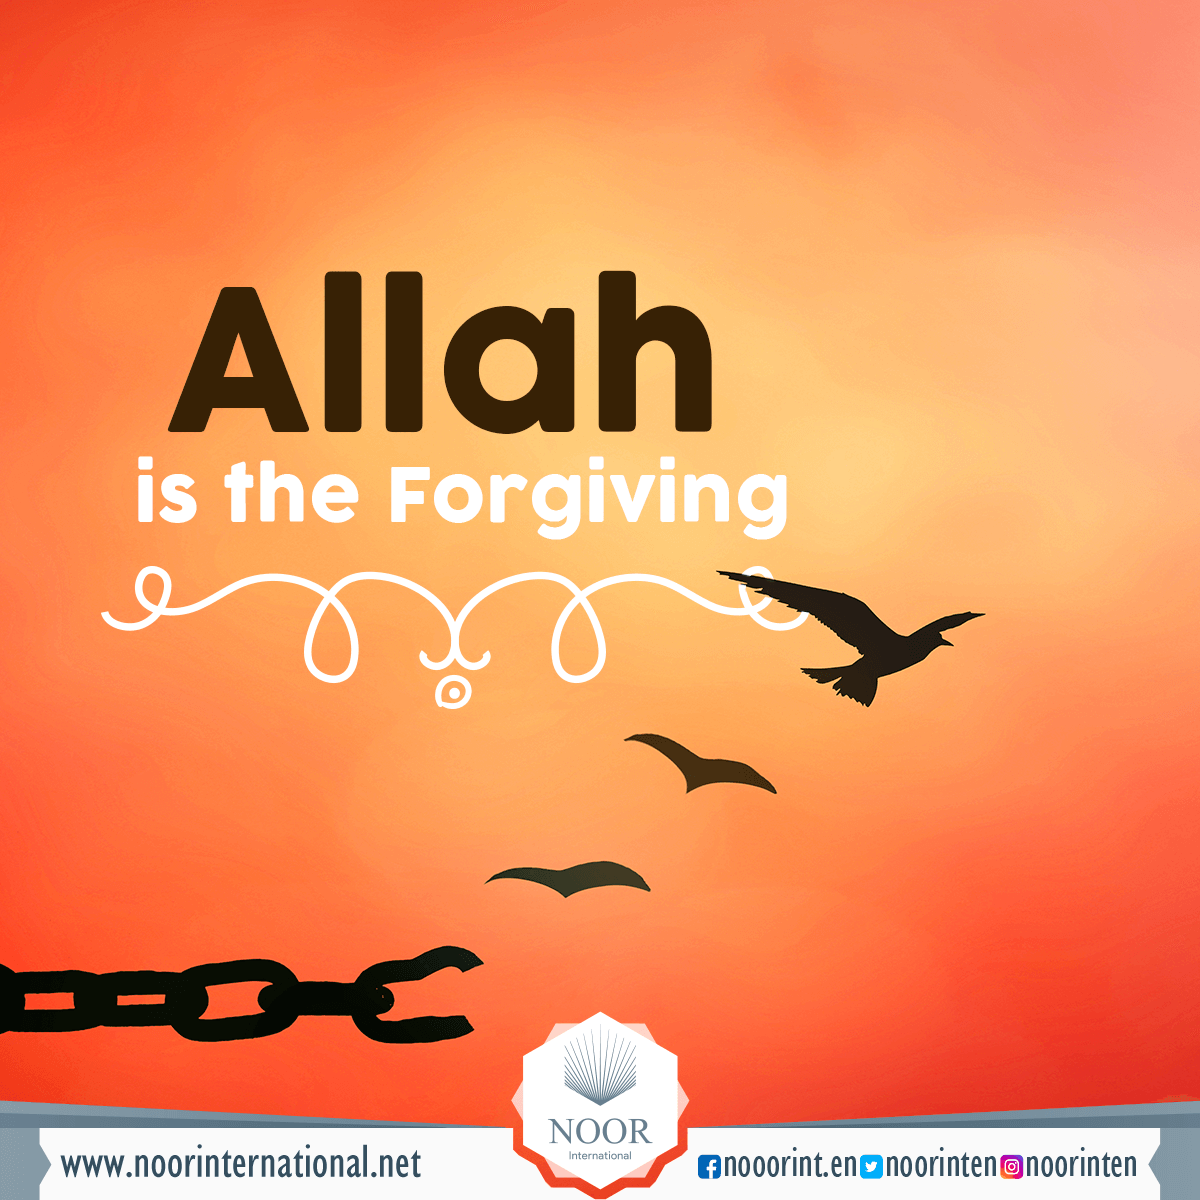 Allah is the Forgiving